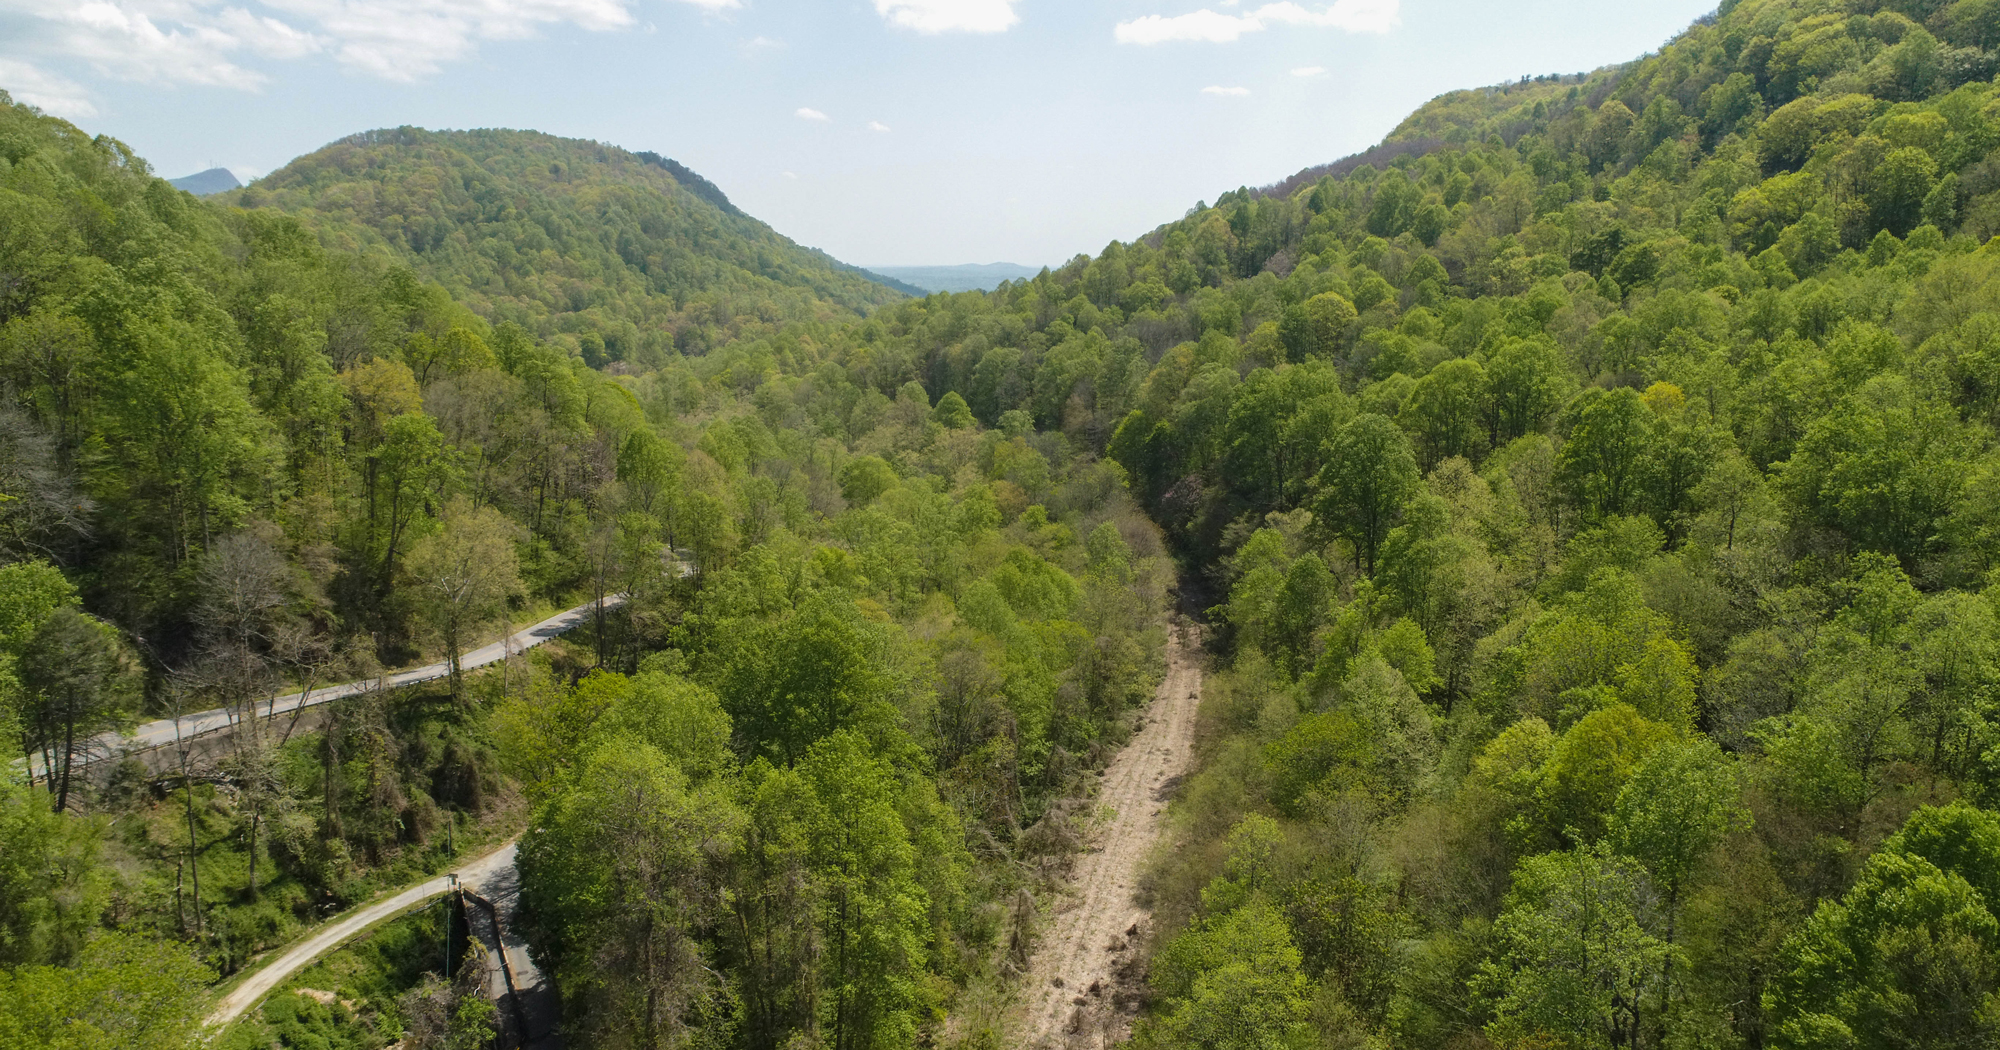 The proposed rail line will travel from Upstate SC through the mountains and valleys of Western NC